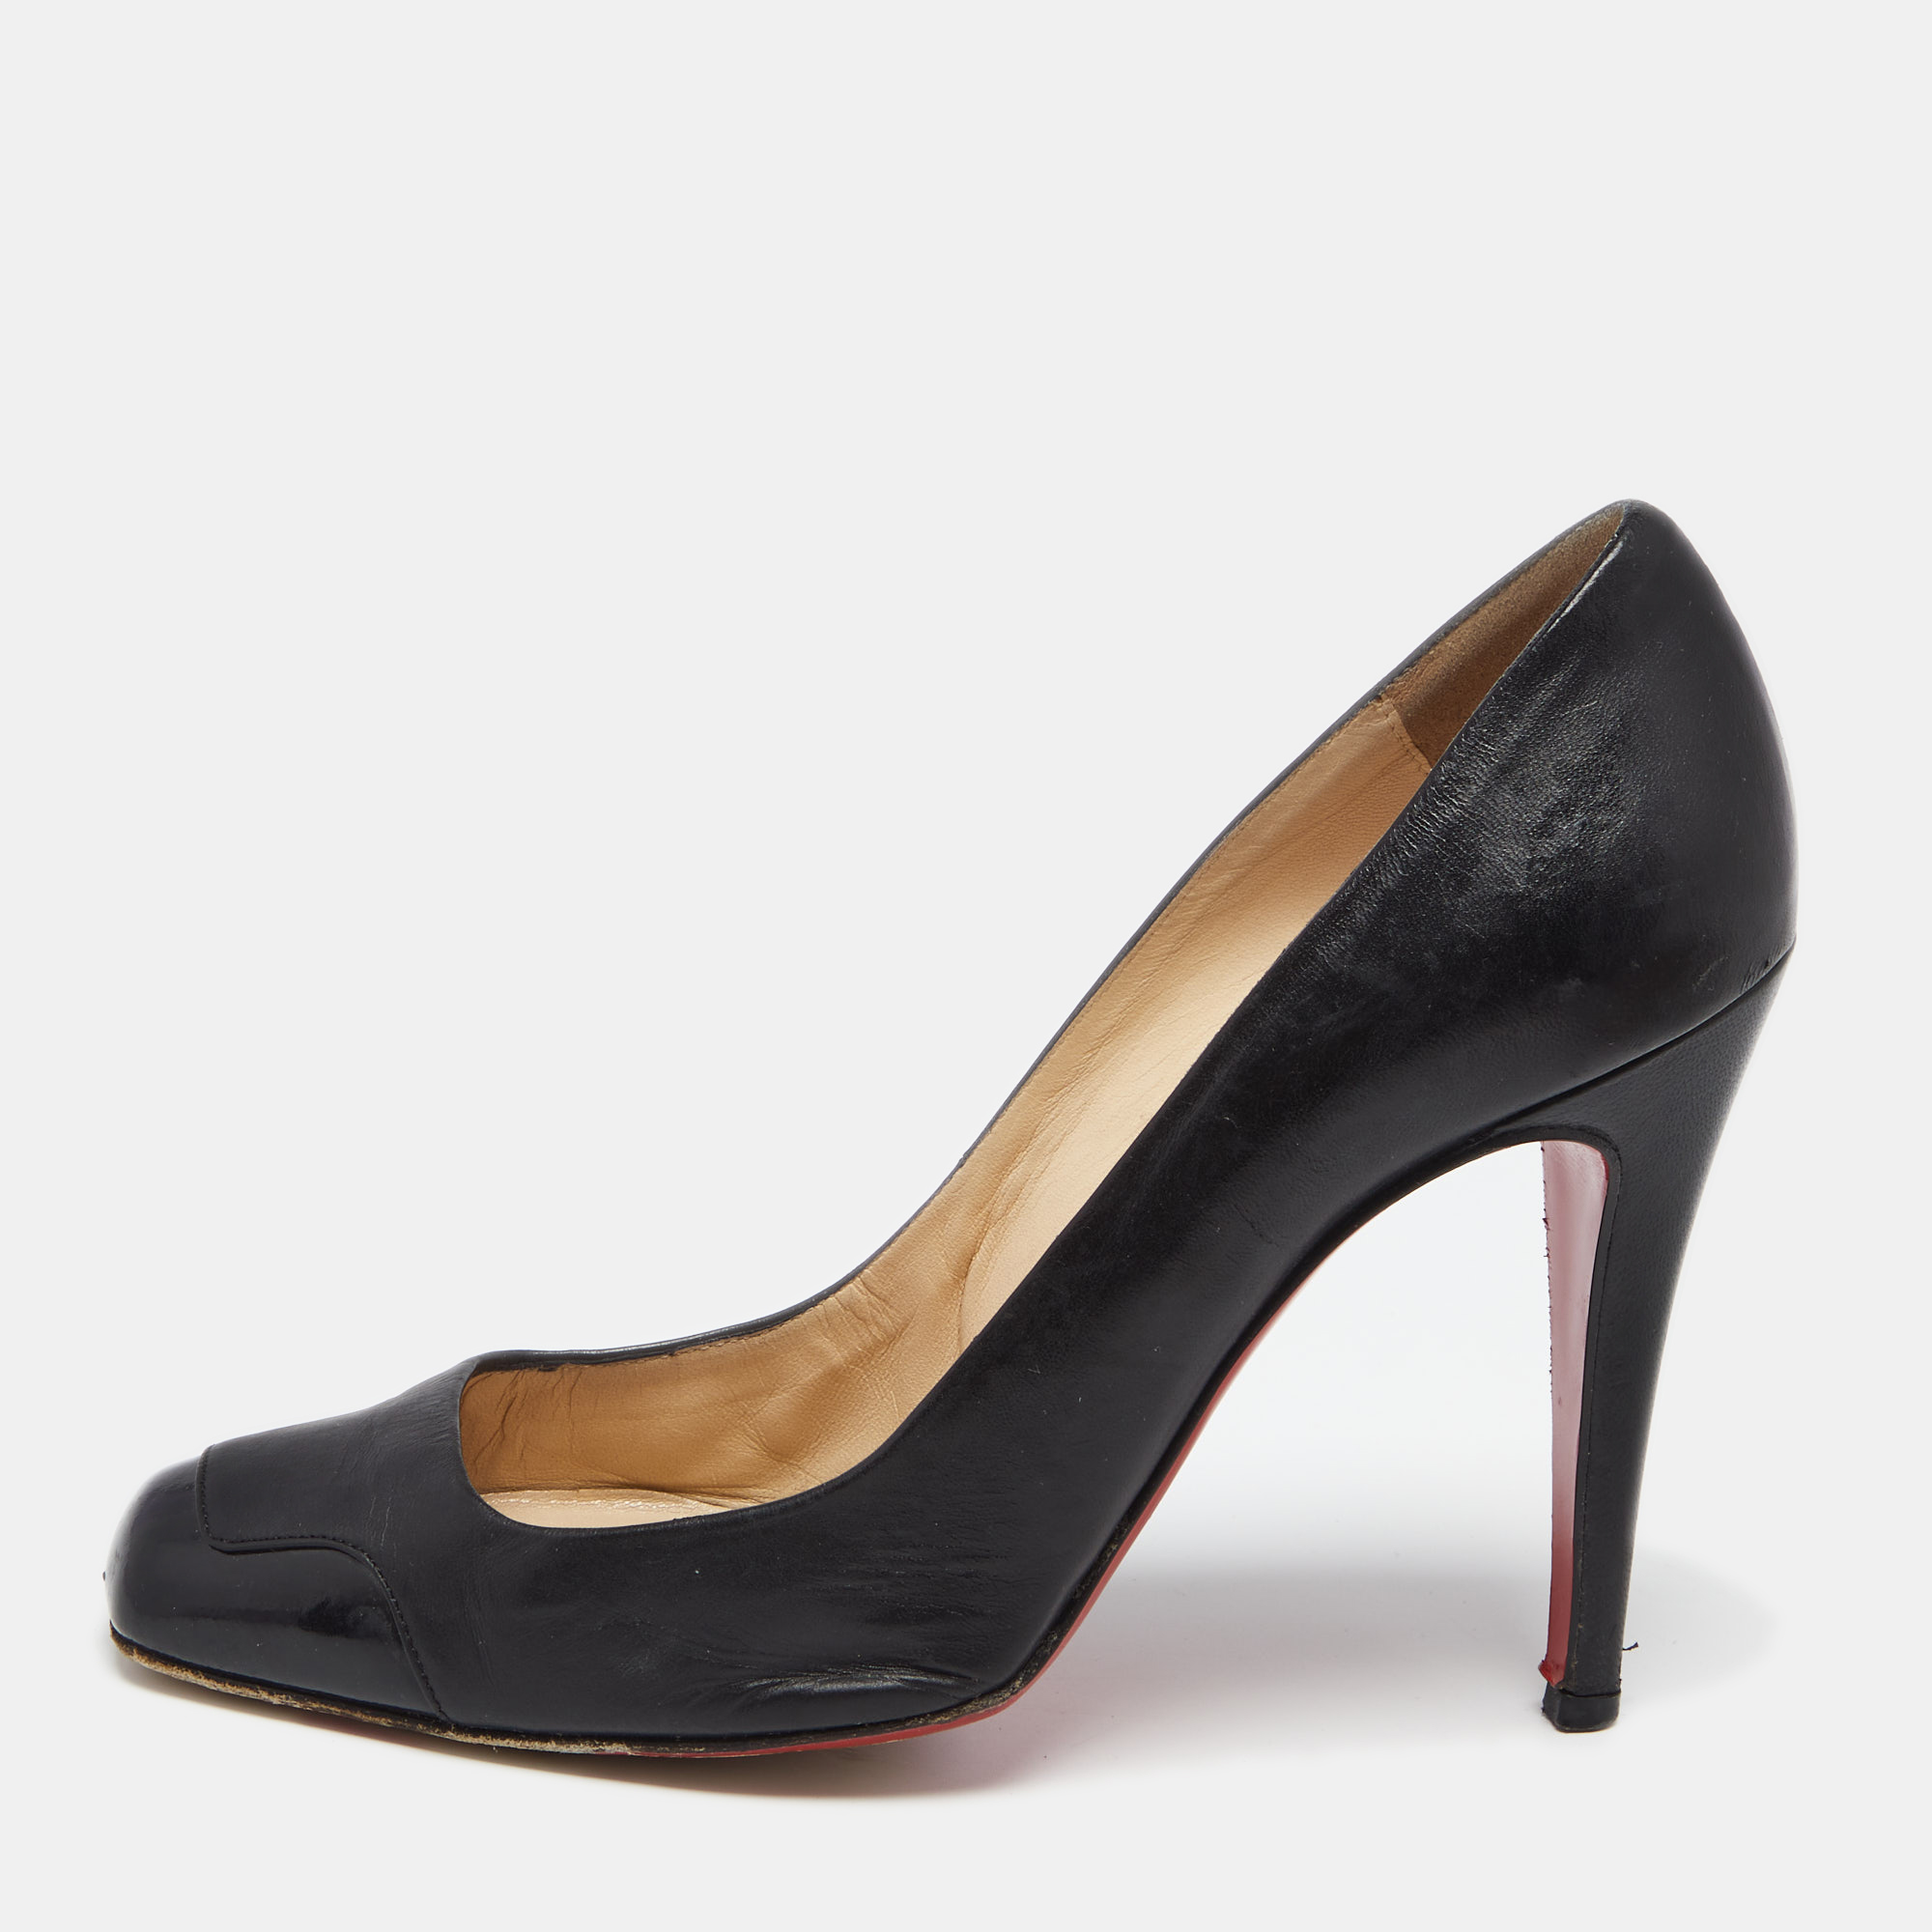 Pre-owned Christian Louboutin Black Patent And Leather Lady Grant Pumps Size 38.5